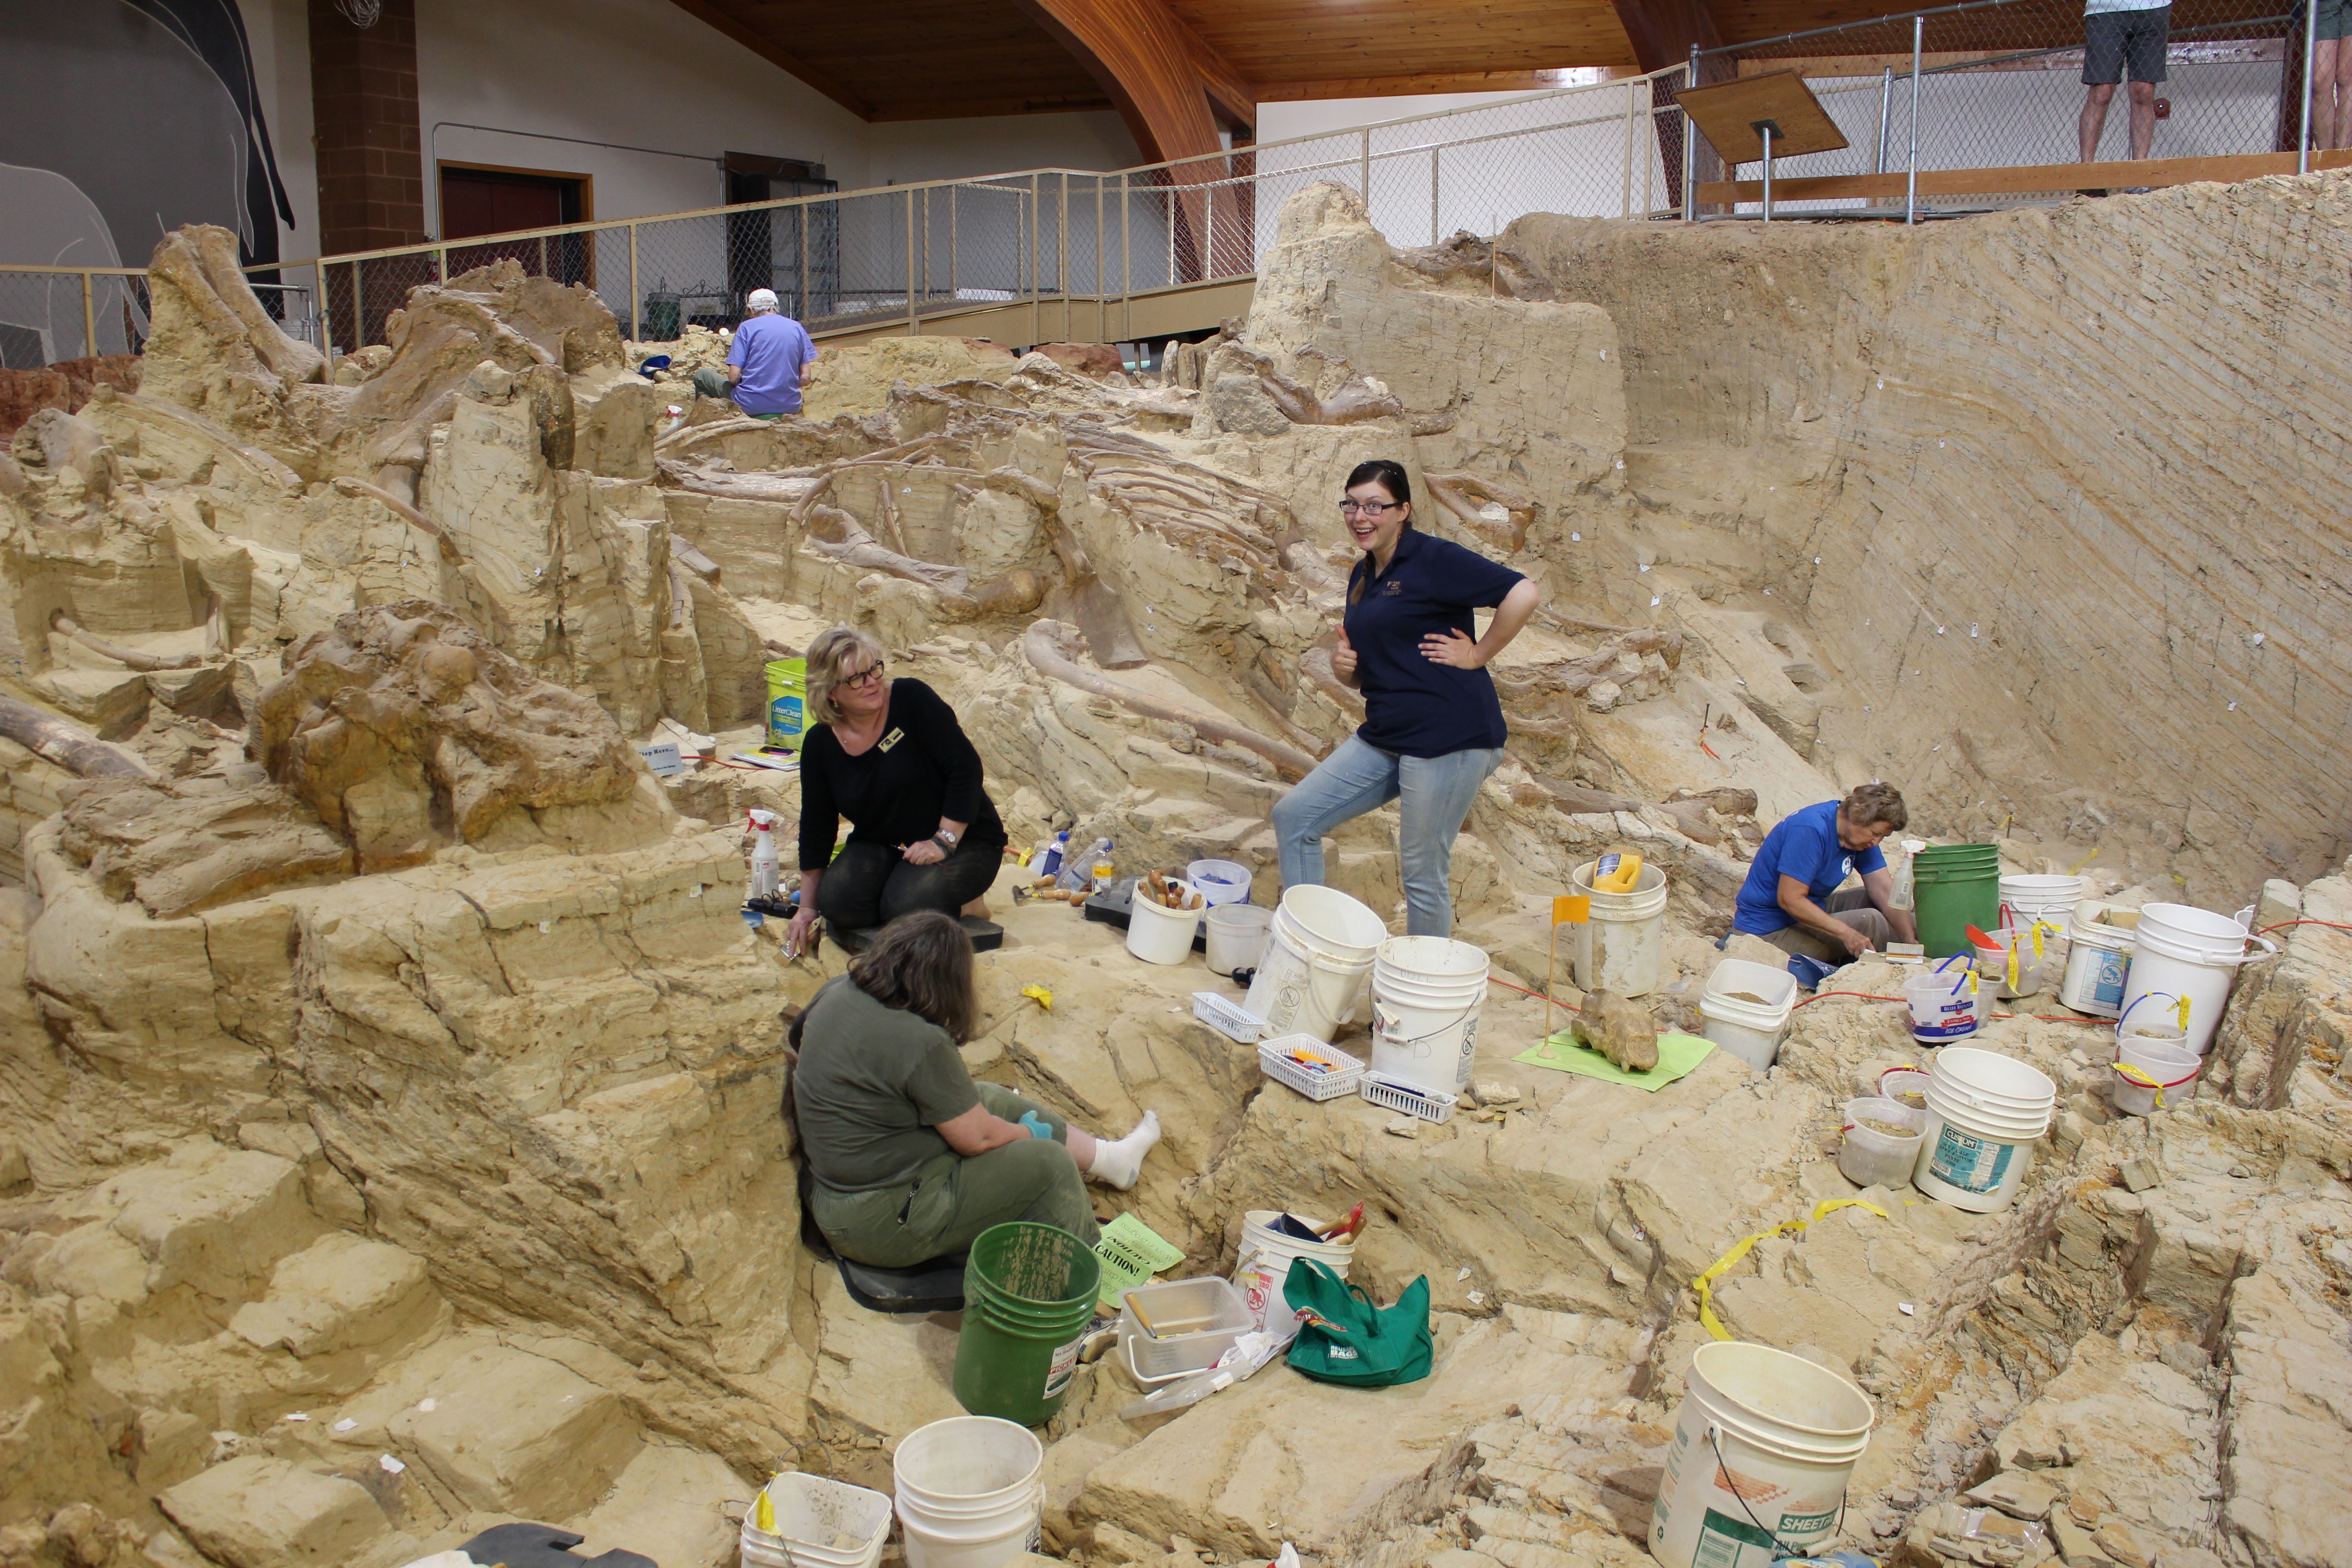 The Mammoth Site Excavation and Preservation Program